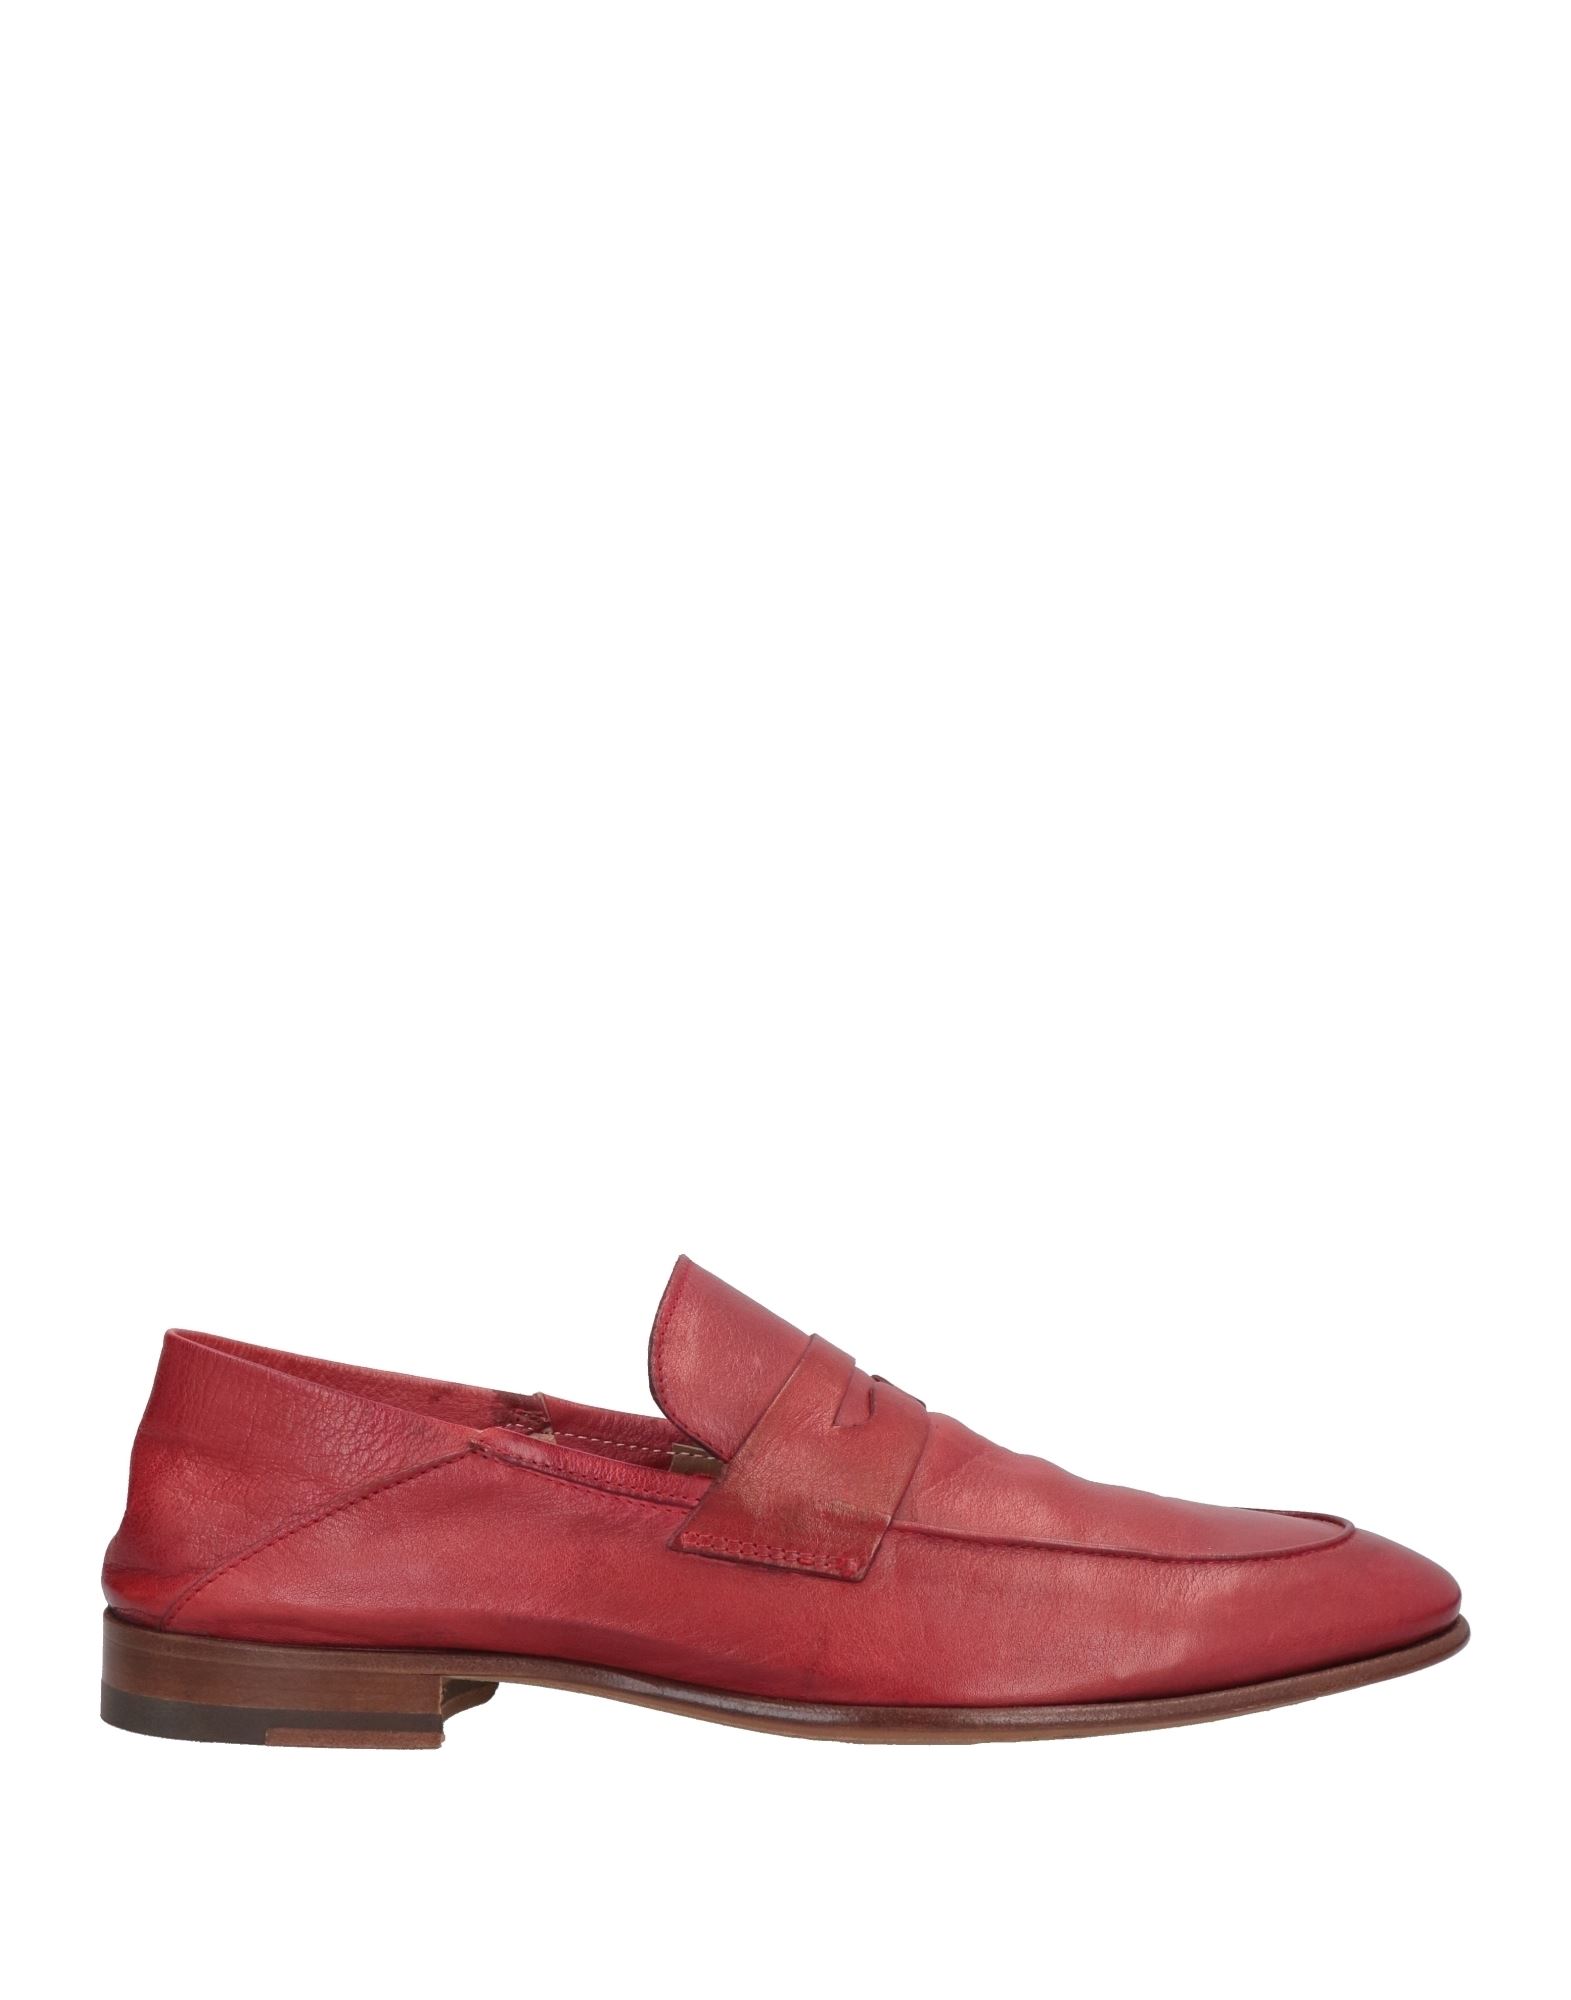 Calpierre Loafers In Burgundy